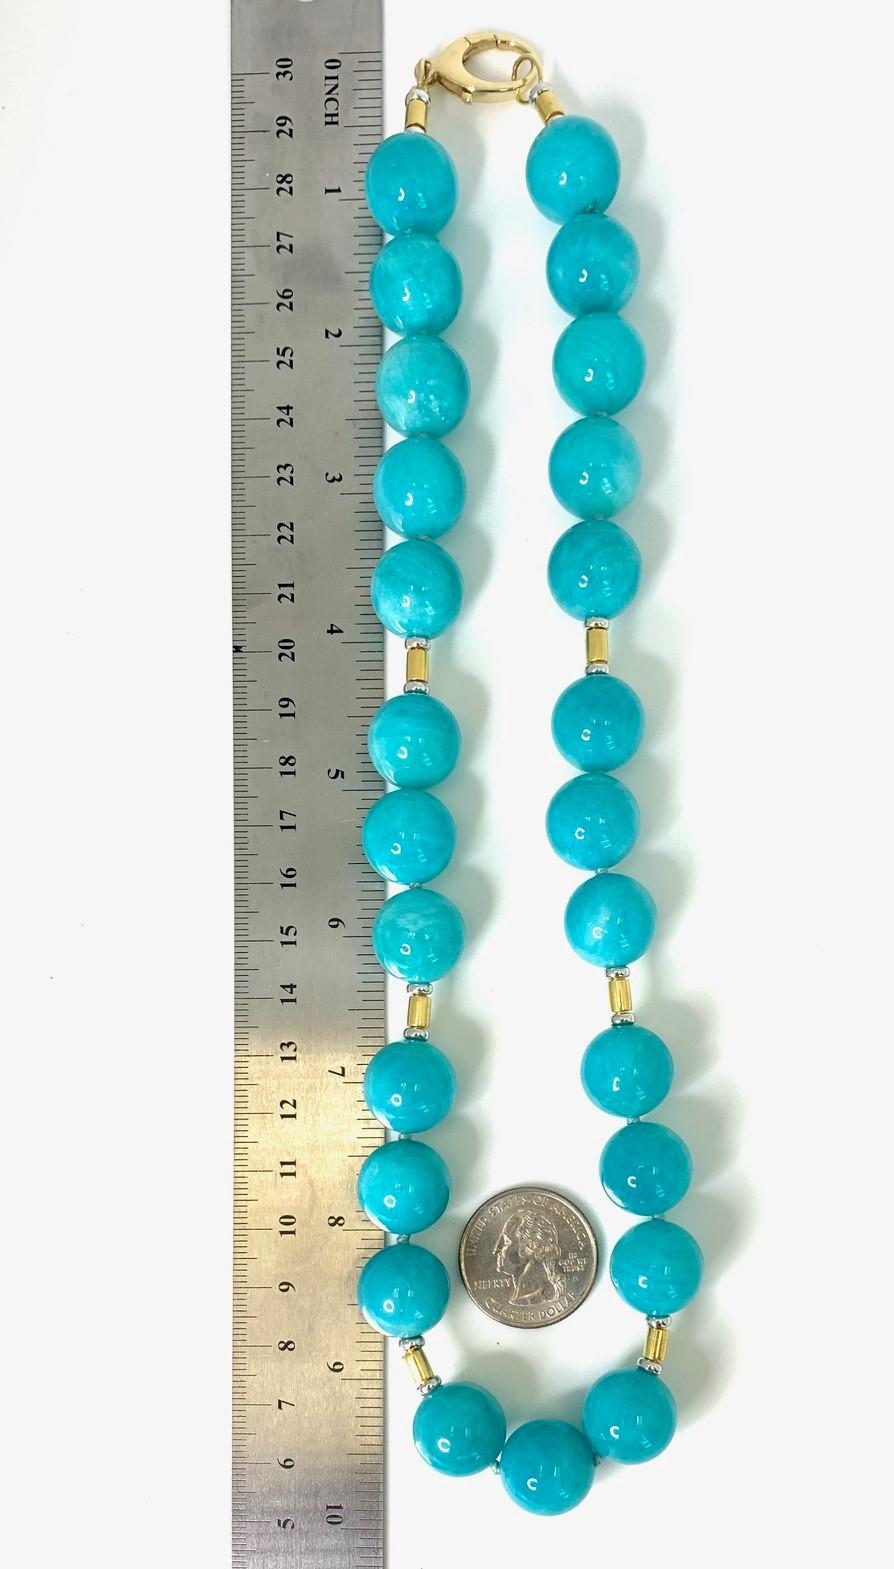 what do blue beads represent